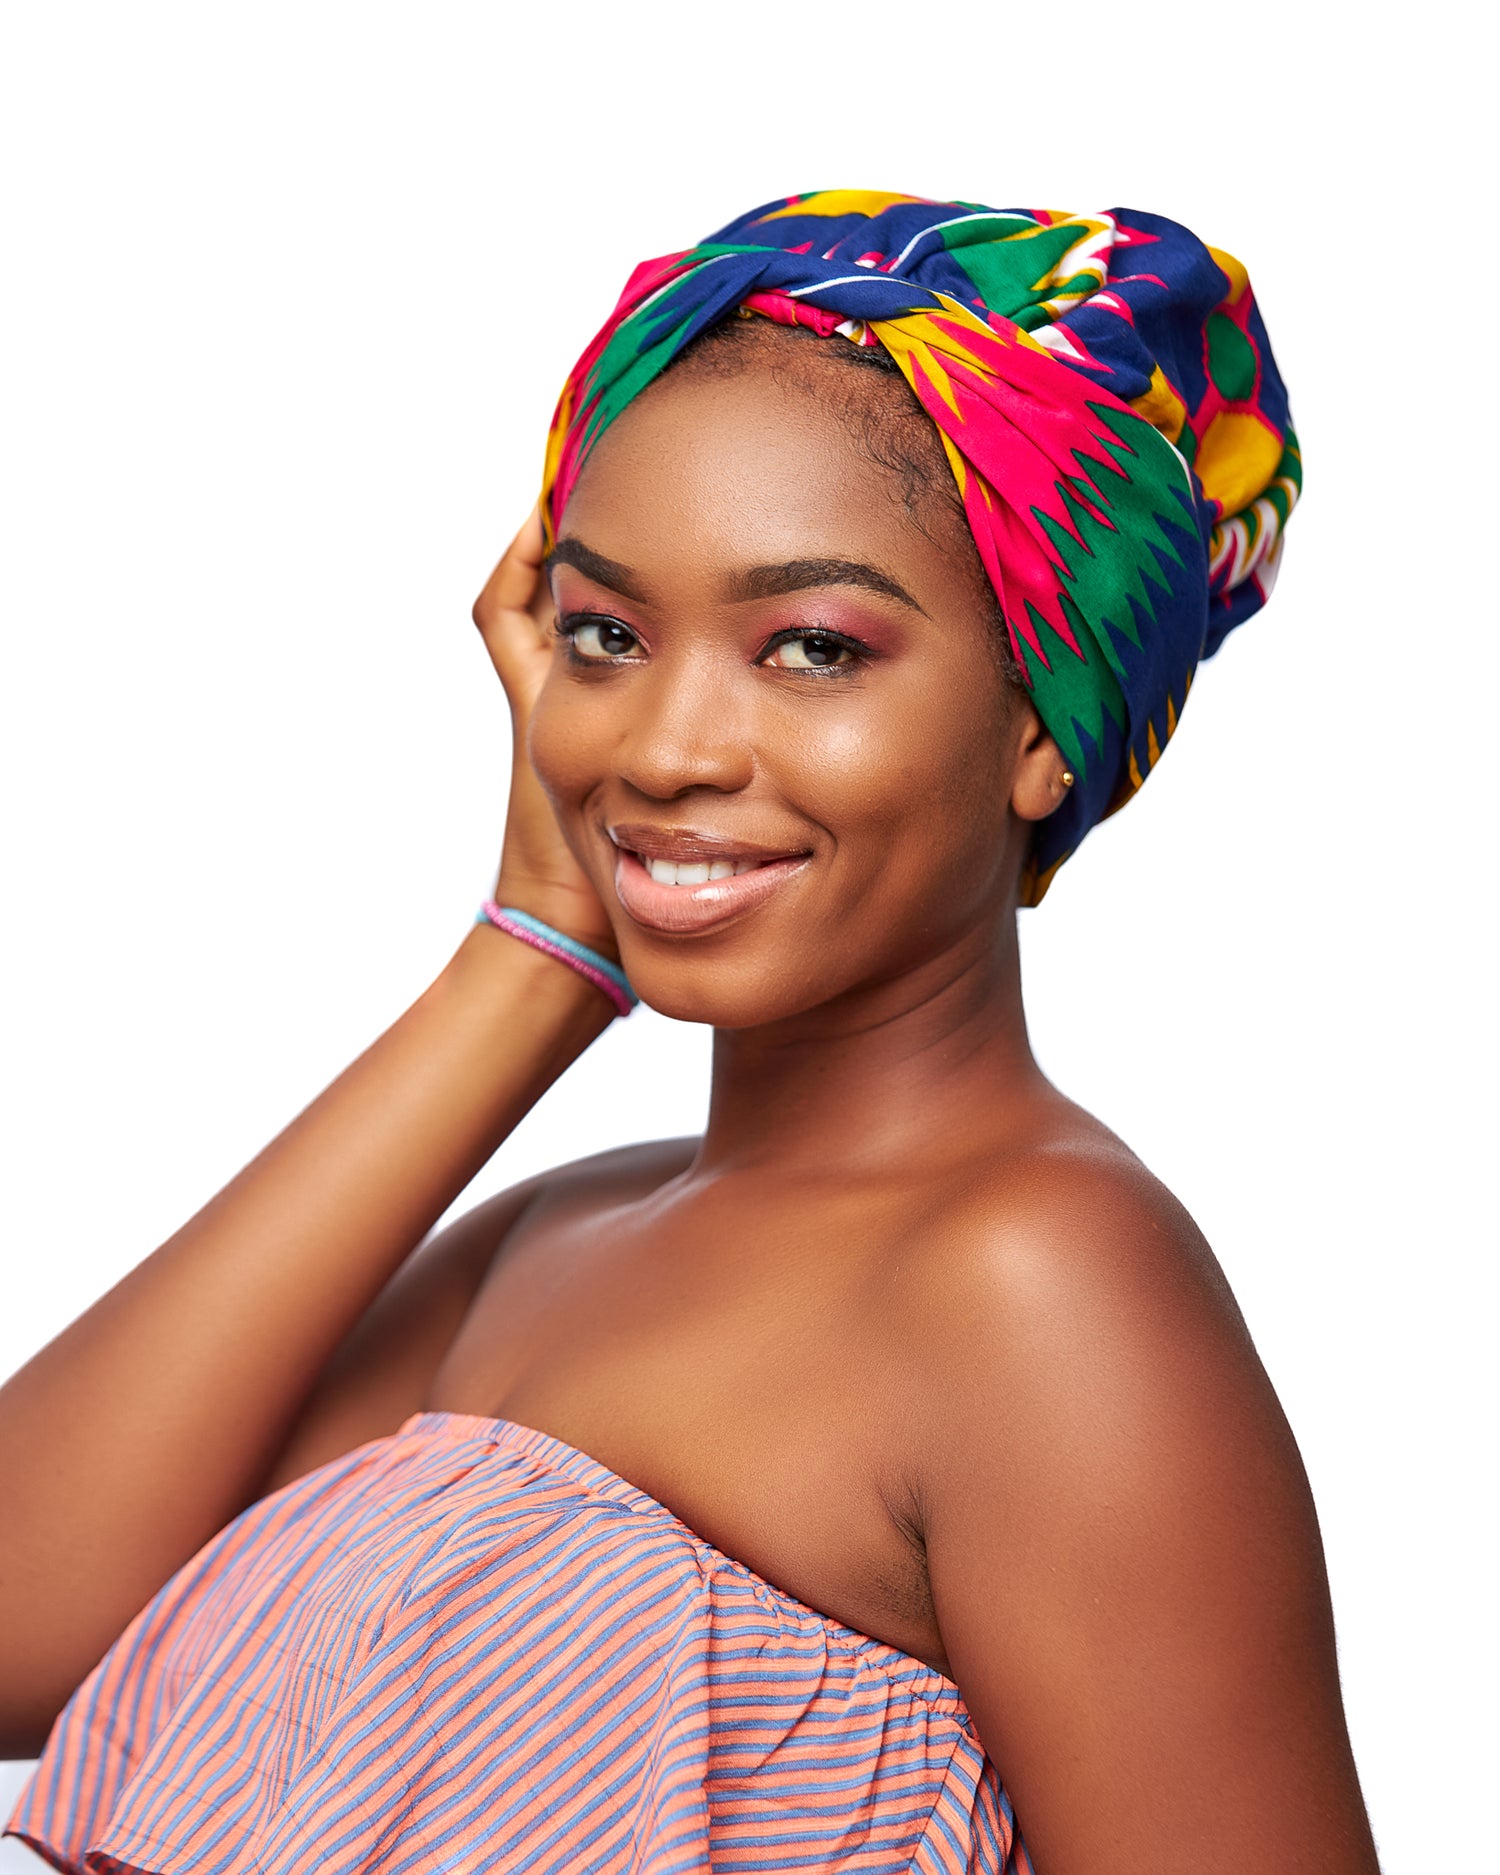 Ghanaian Kente Wax Print Made of Pink,Gold, Red, Green,Blue Blend of Beautiful Colours And Pattern With Adinkira Symbols, Hand Made Elastic Silklined Bonnet With Band